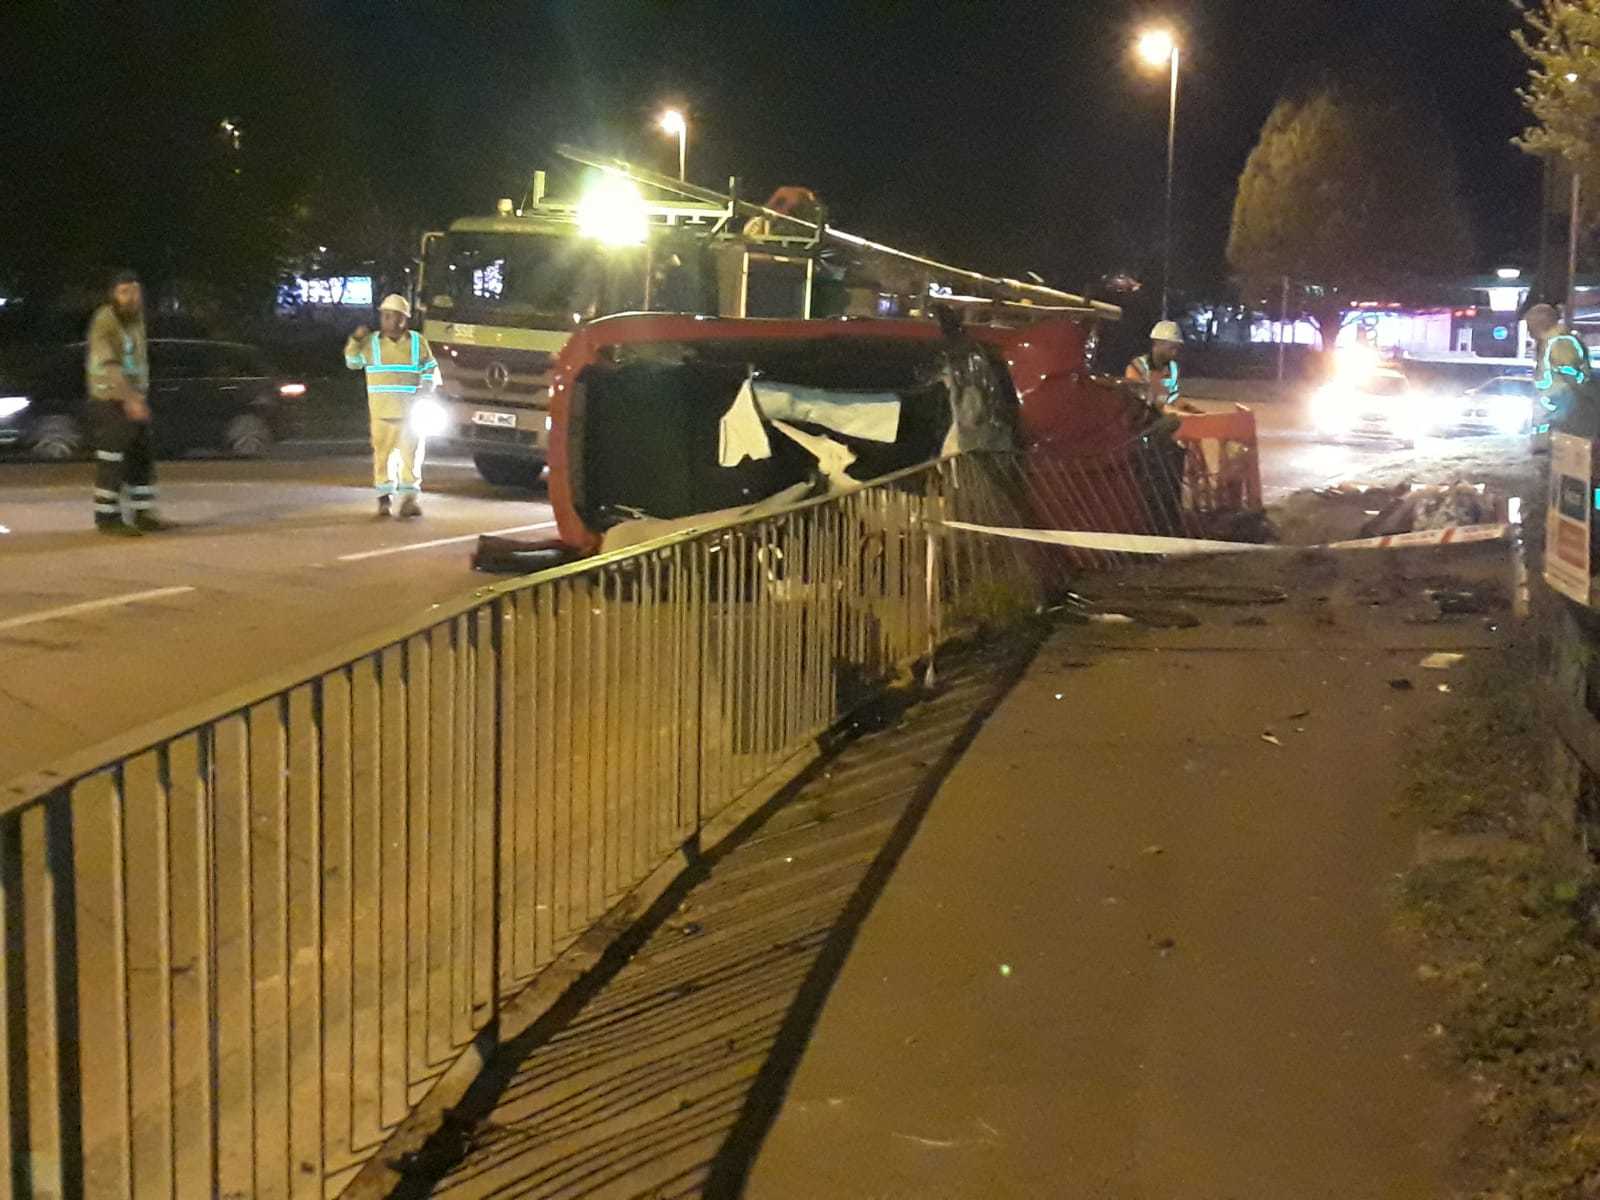 The red Mini Cooper collided with a lamppost